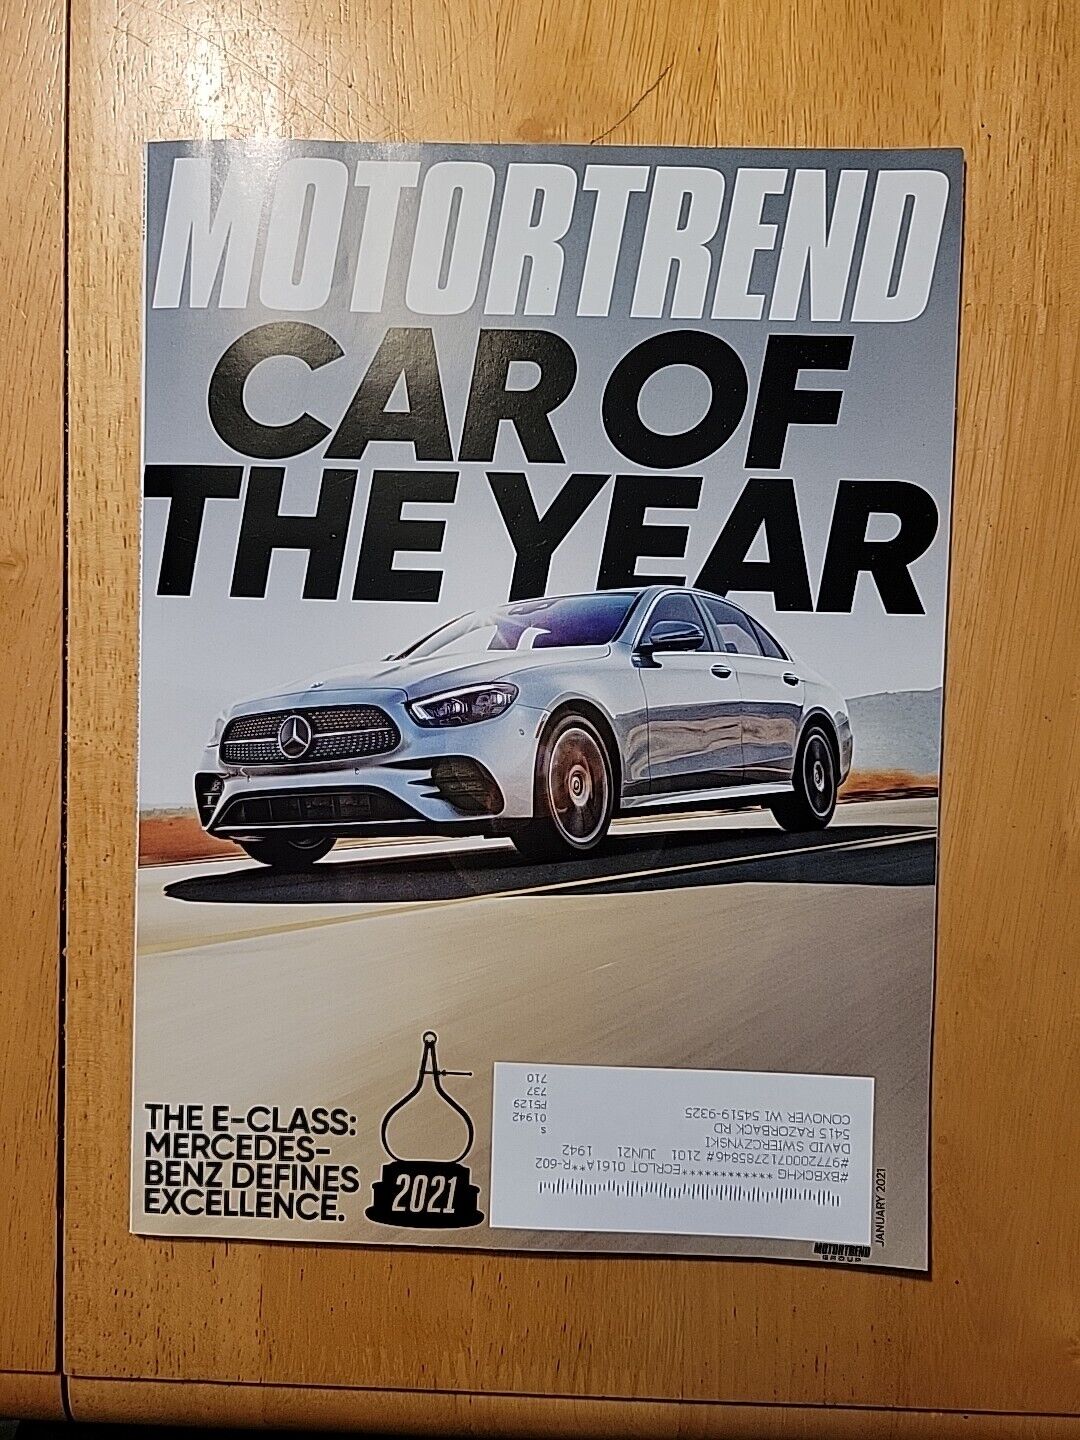 Motor Trend Magazine 2021 Car Of The Year Mercedes-Benz E-Class